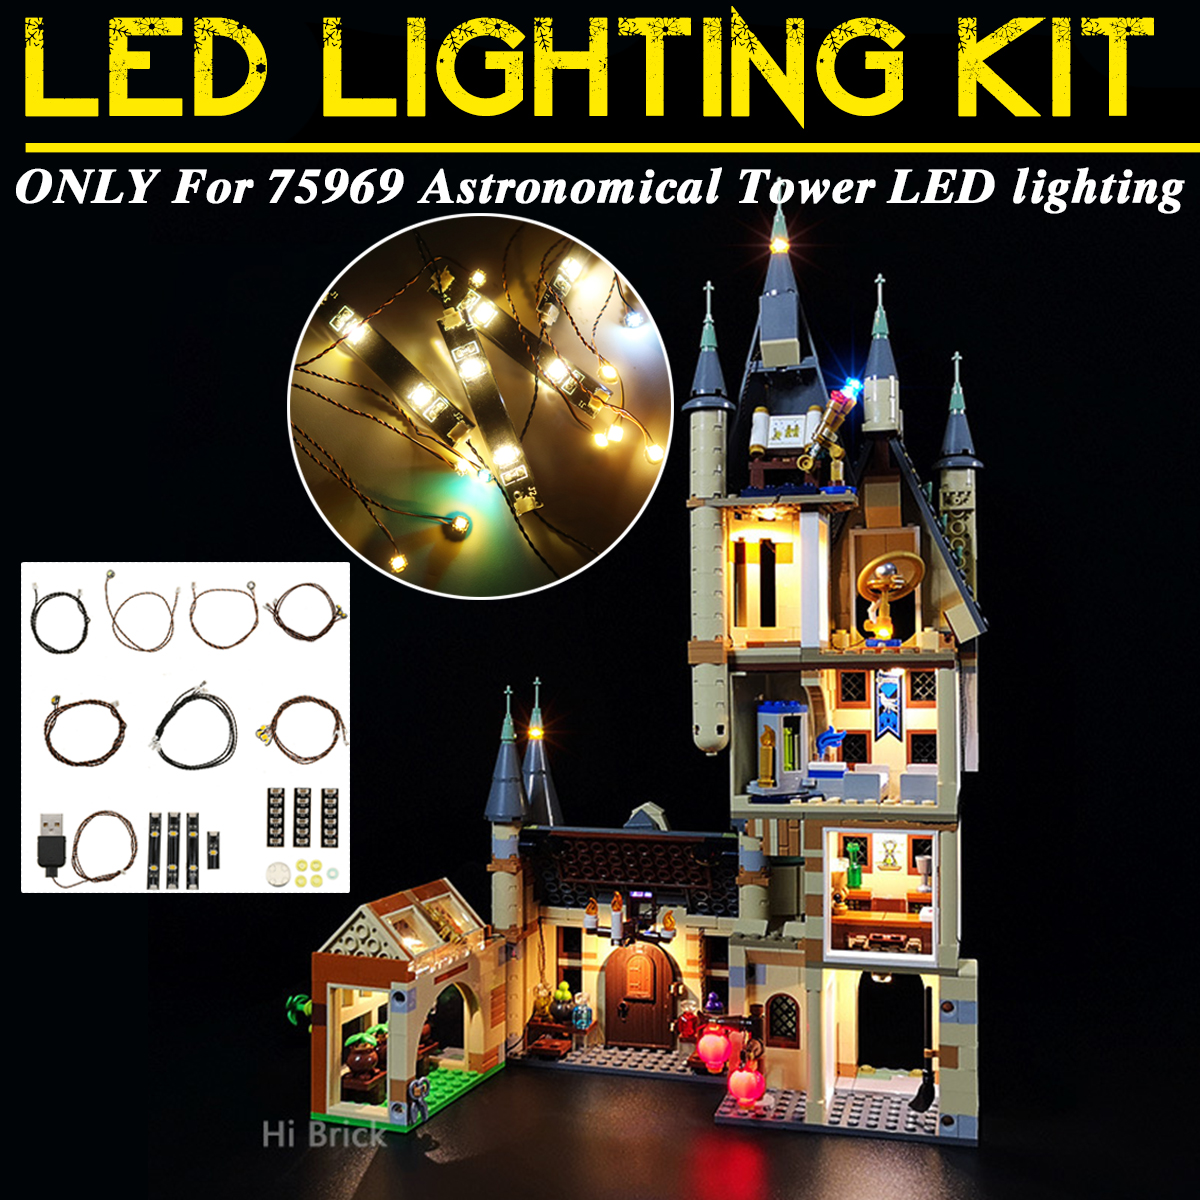 USB-Powered-DIY-LED-Lighting-Kit-ONLY-for-Building-Blocks-75969-Astronomical-Tower-1731996-1